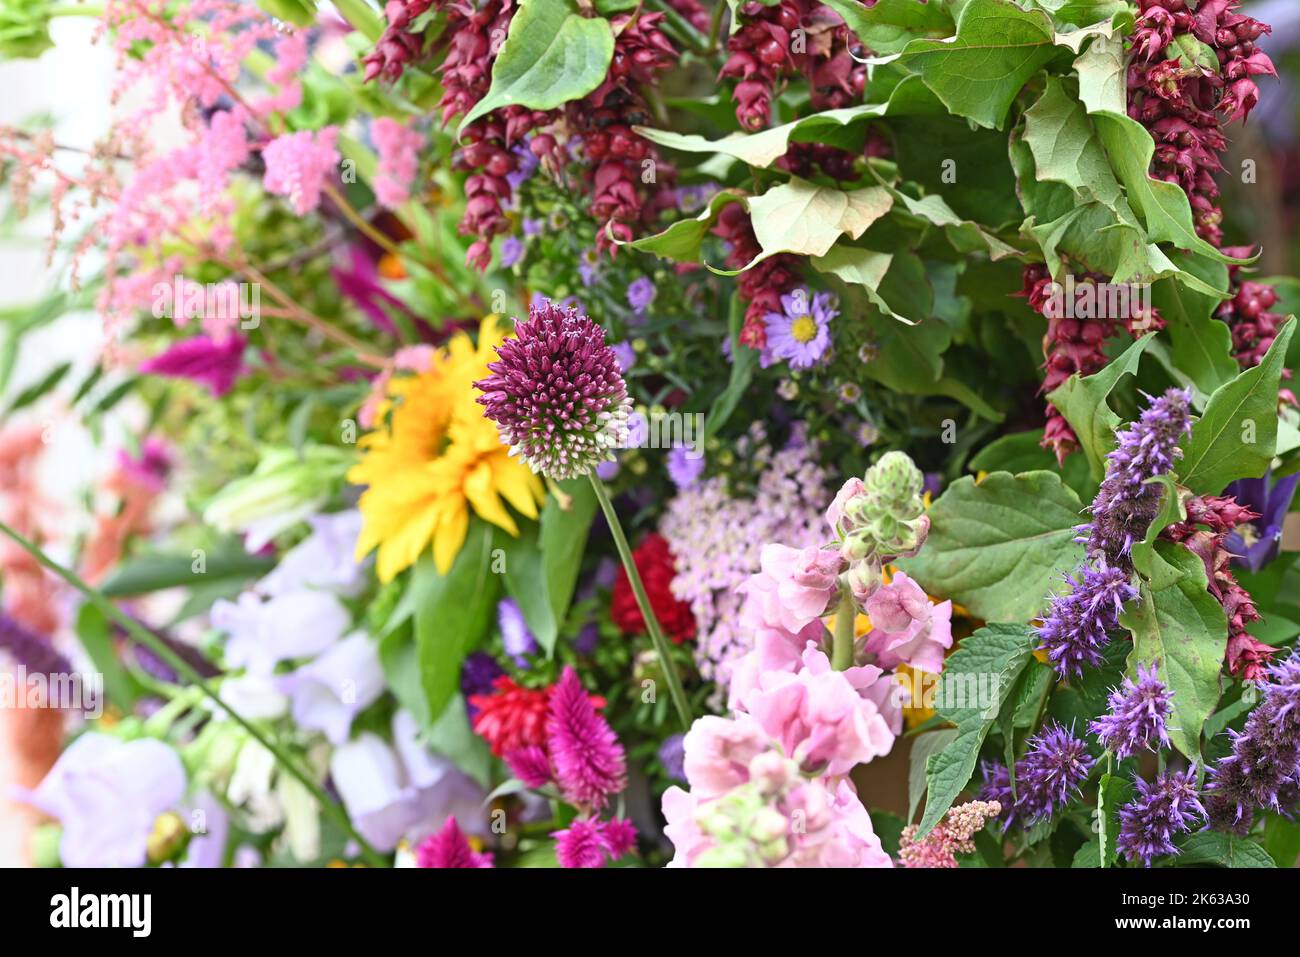 Colorful flower bouquet with Antirrhinum and sunflower. Stock Photo